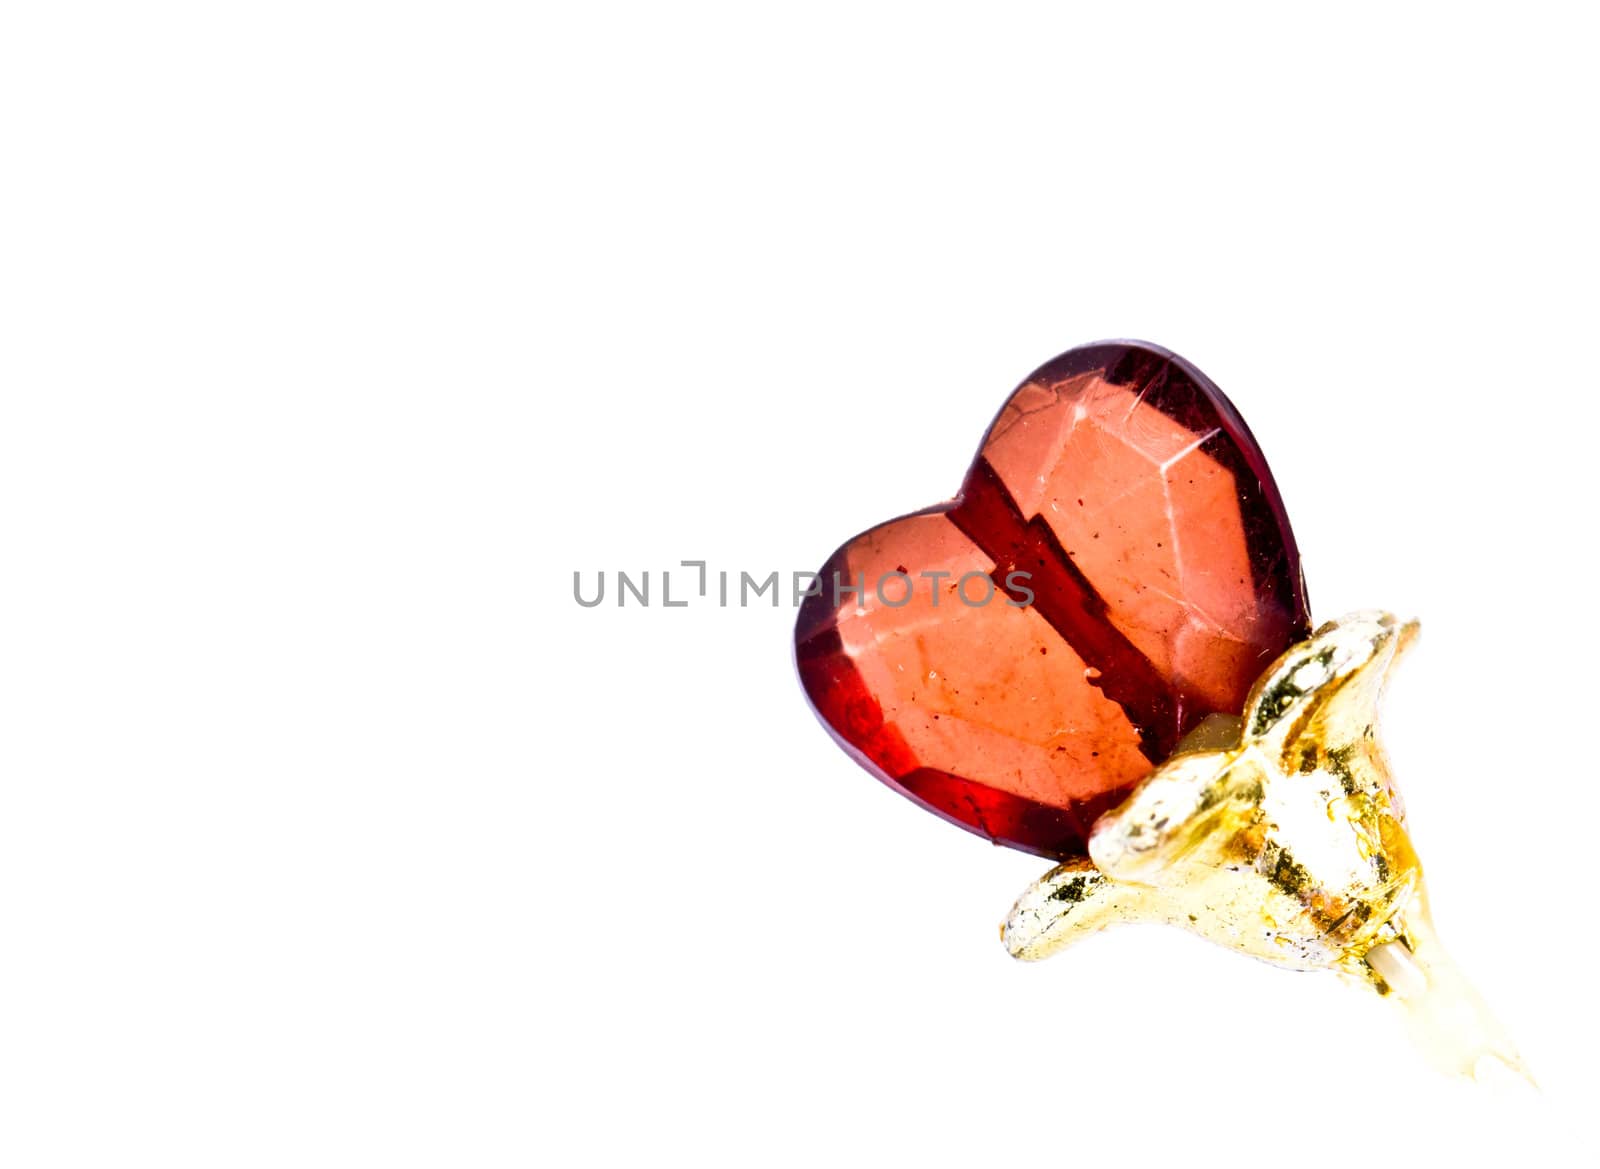 shining stone in the shape of heart against white background